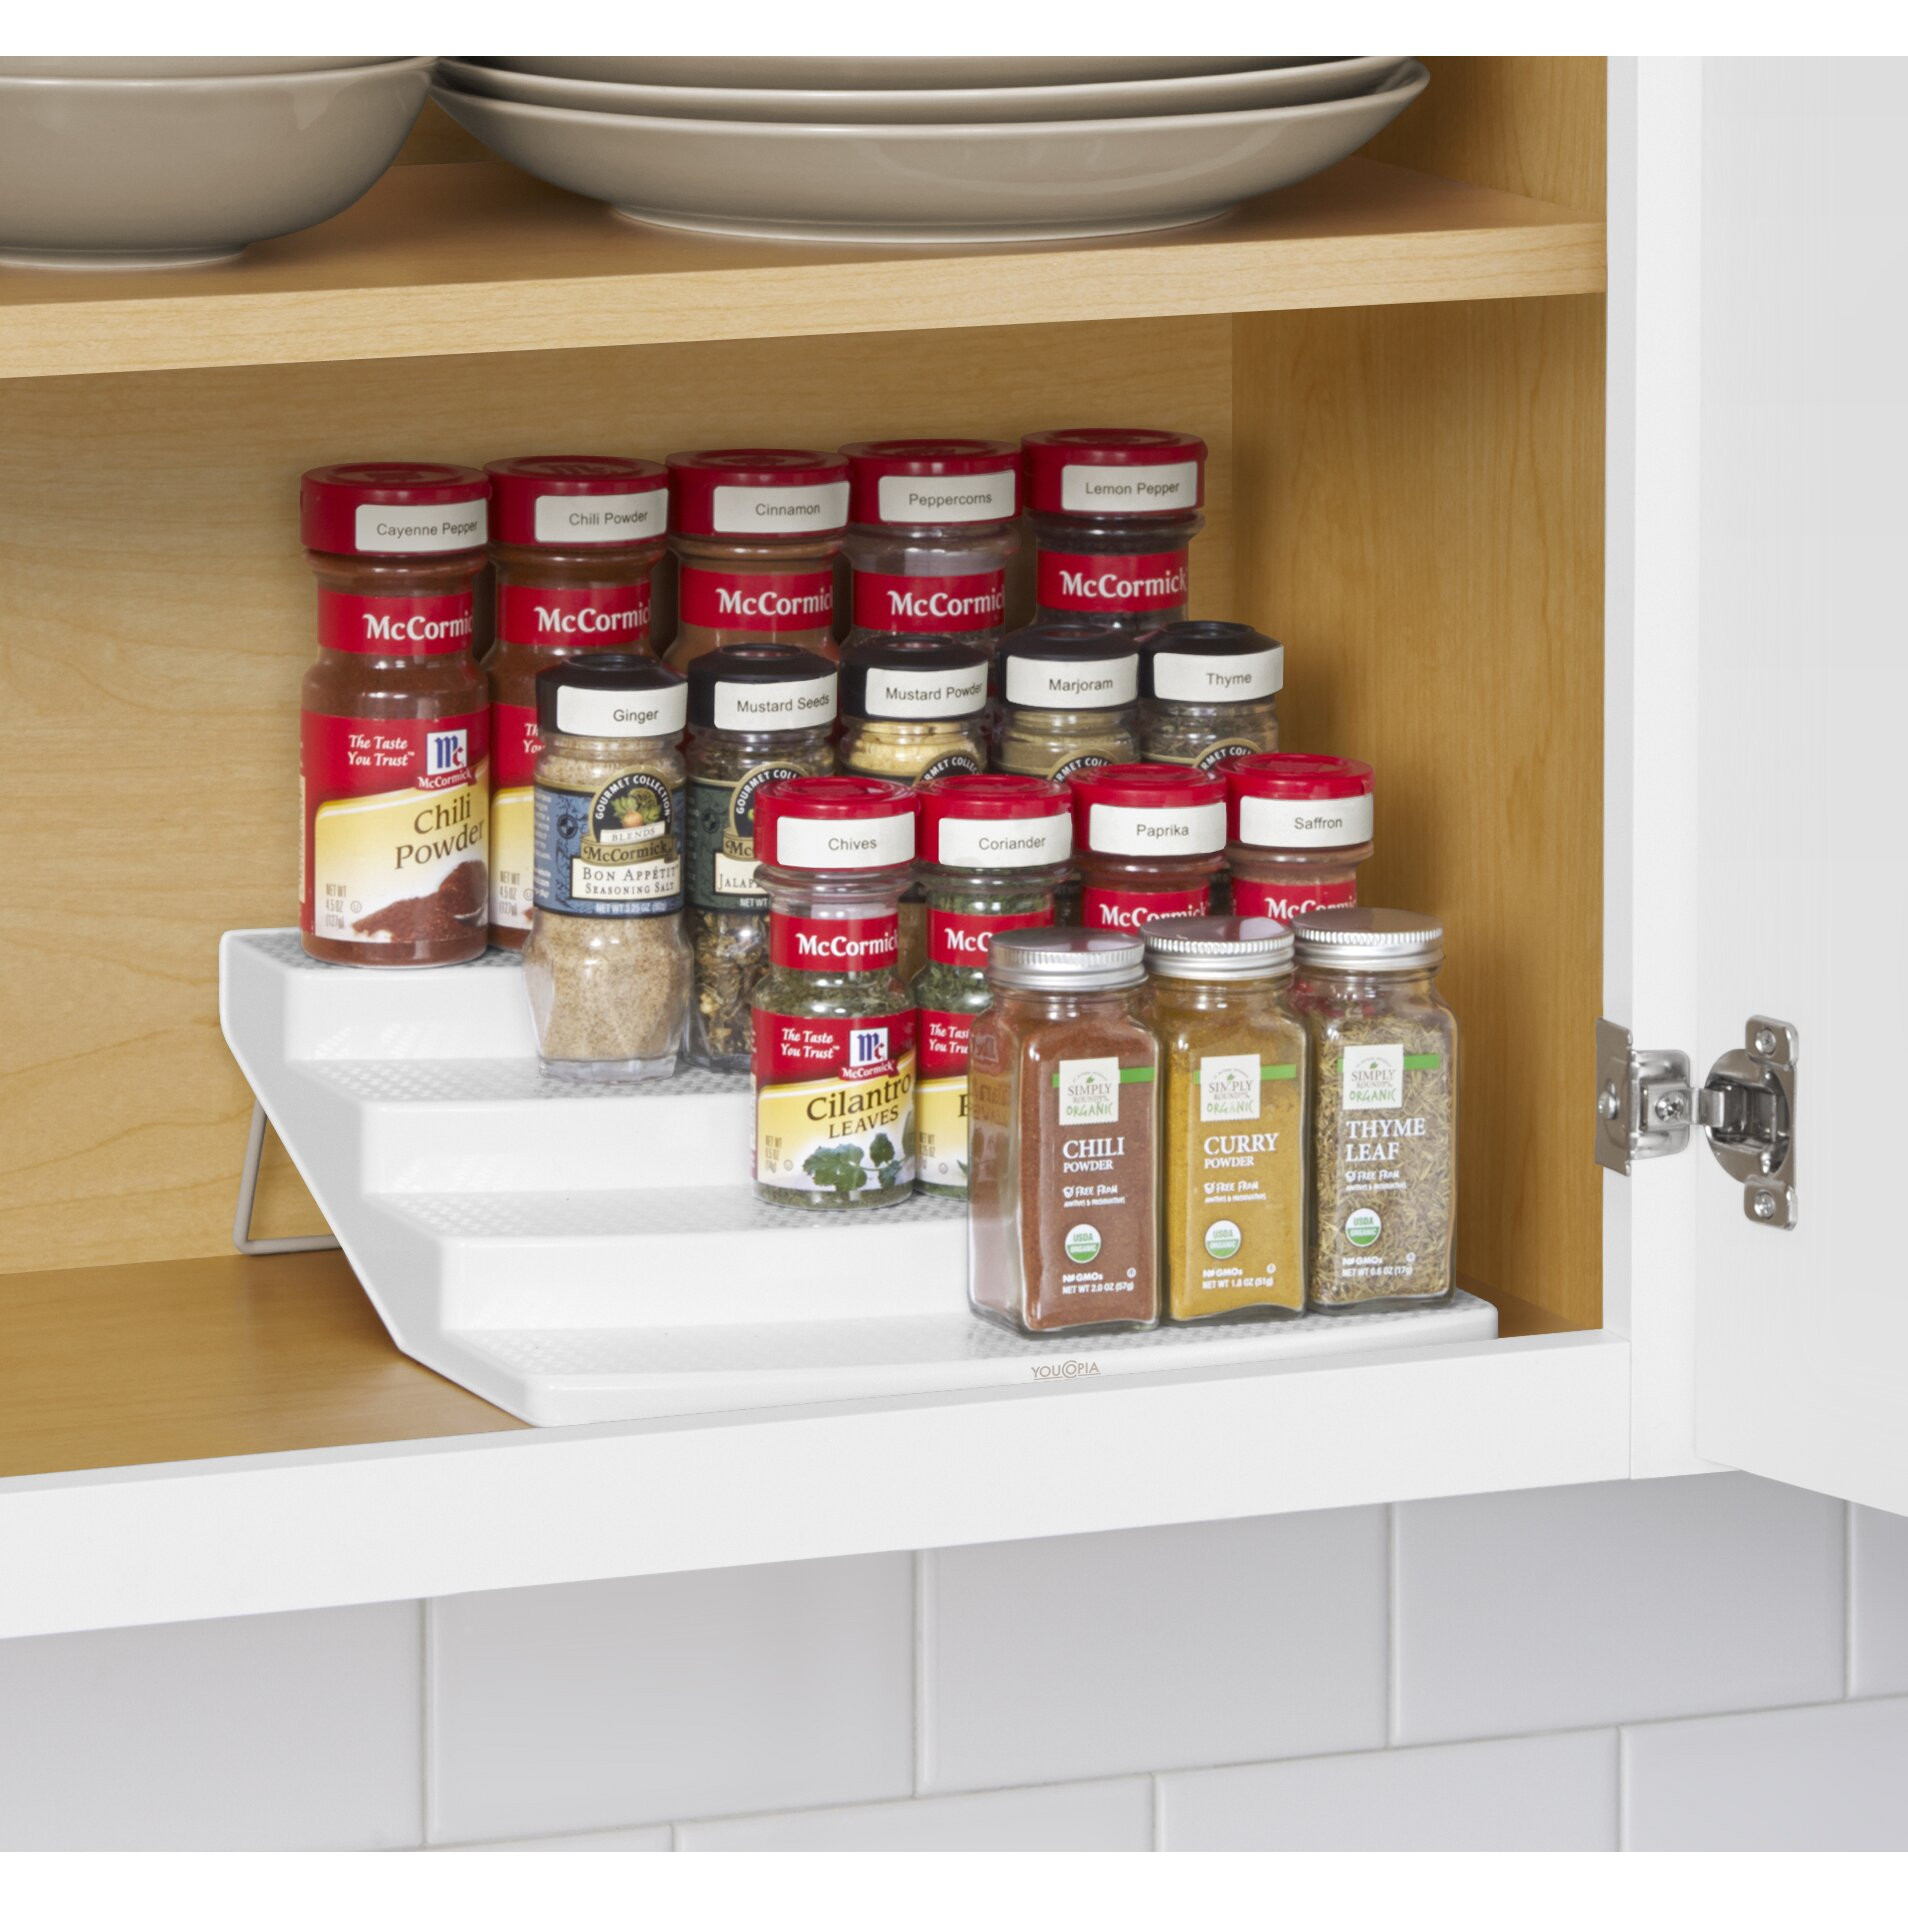 Kitchen Cabinet Spice Organizers
 YouCopia Spice Steps 4 Tier Cabinet Spice Rack Organizer